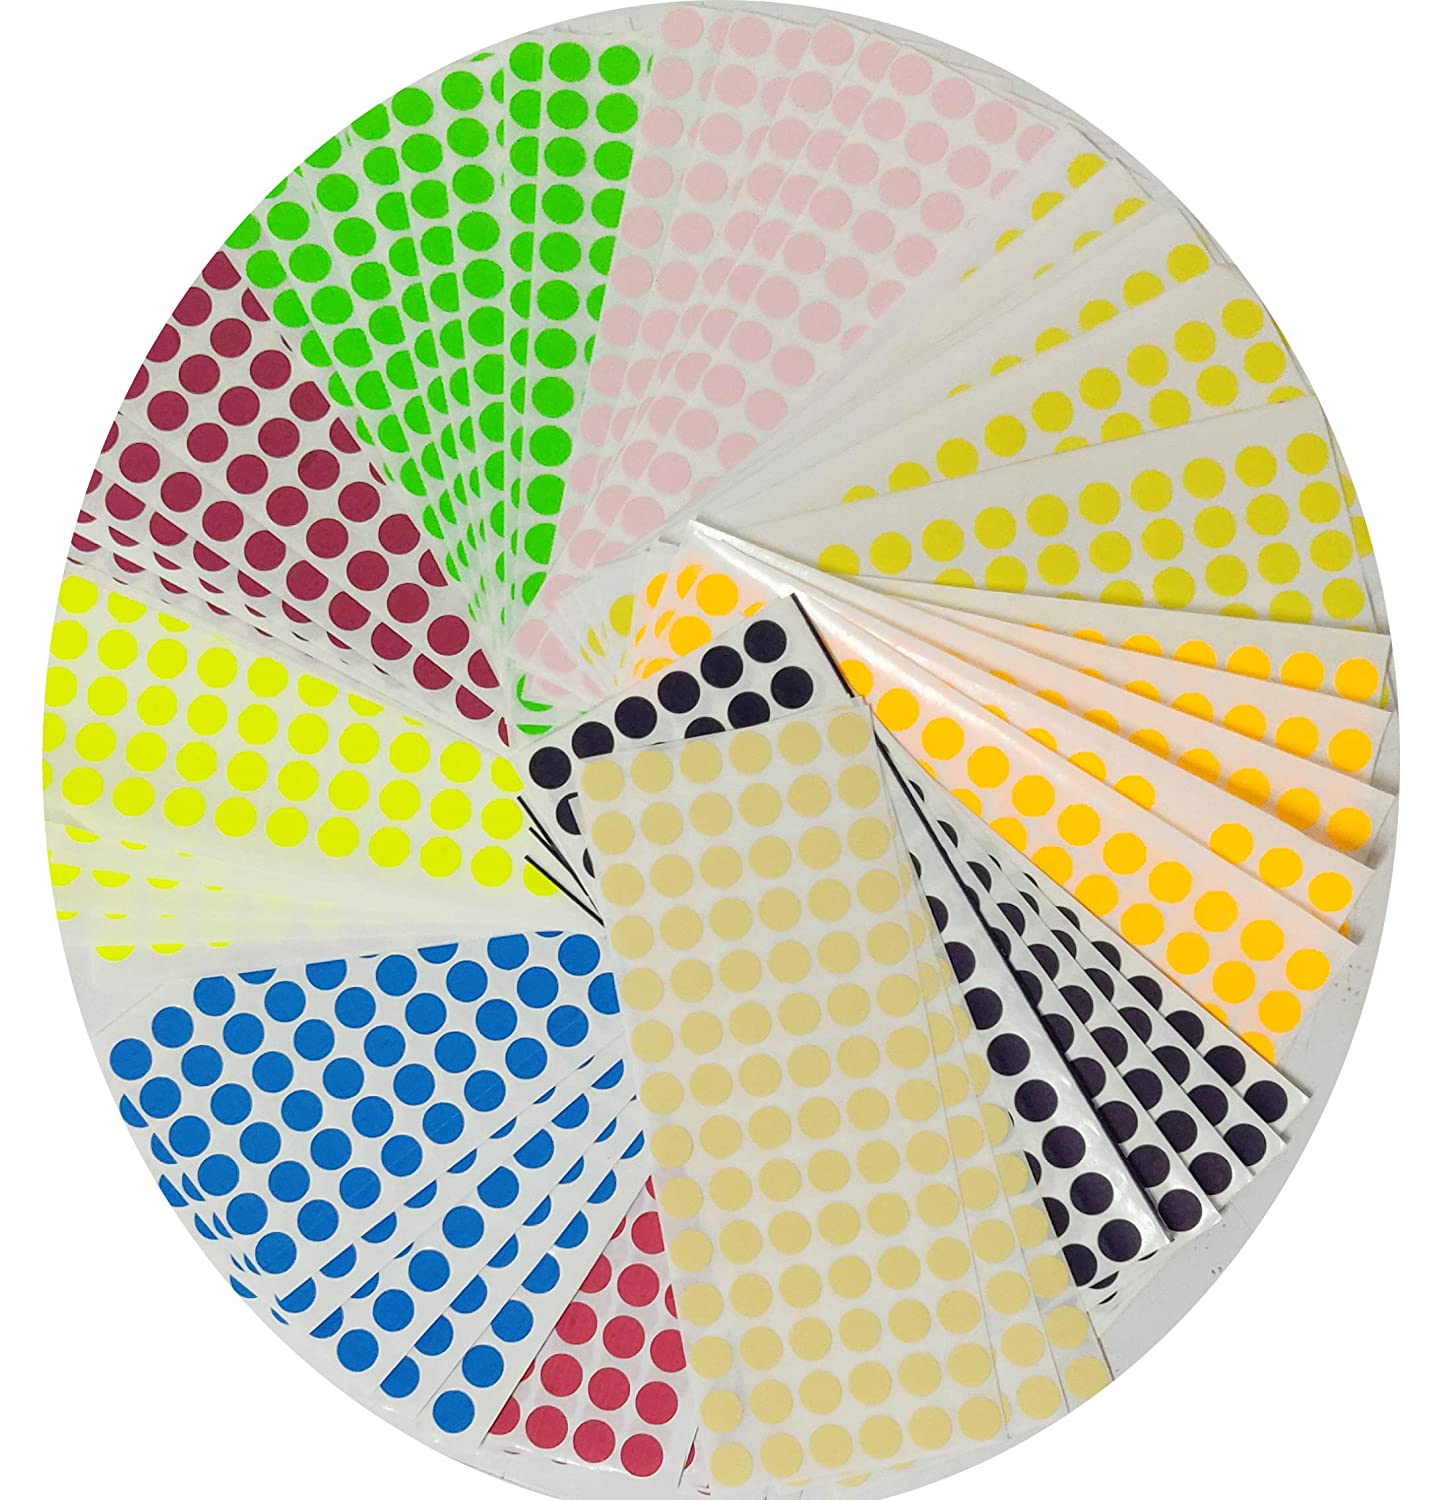 AccuPrints Coloured Round Dots 10-mm or 1 cm or 0.37 inch Stickers for Art and Craft & Games